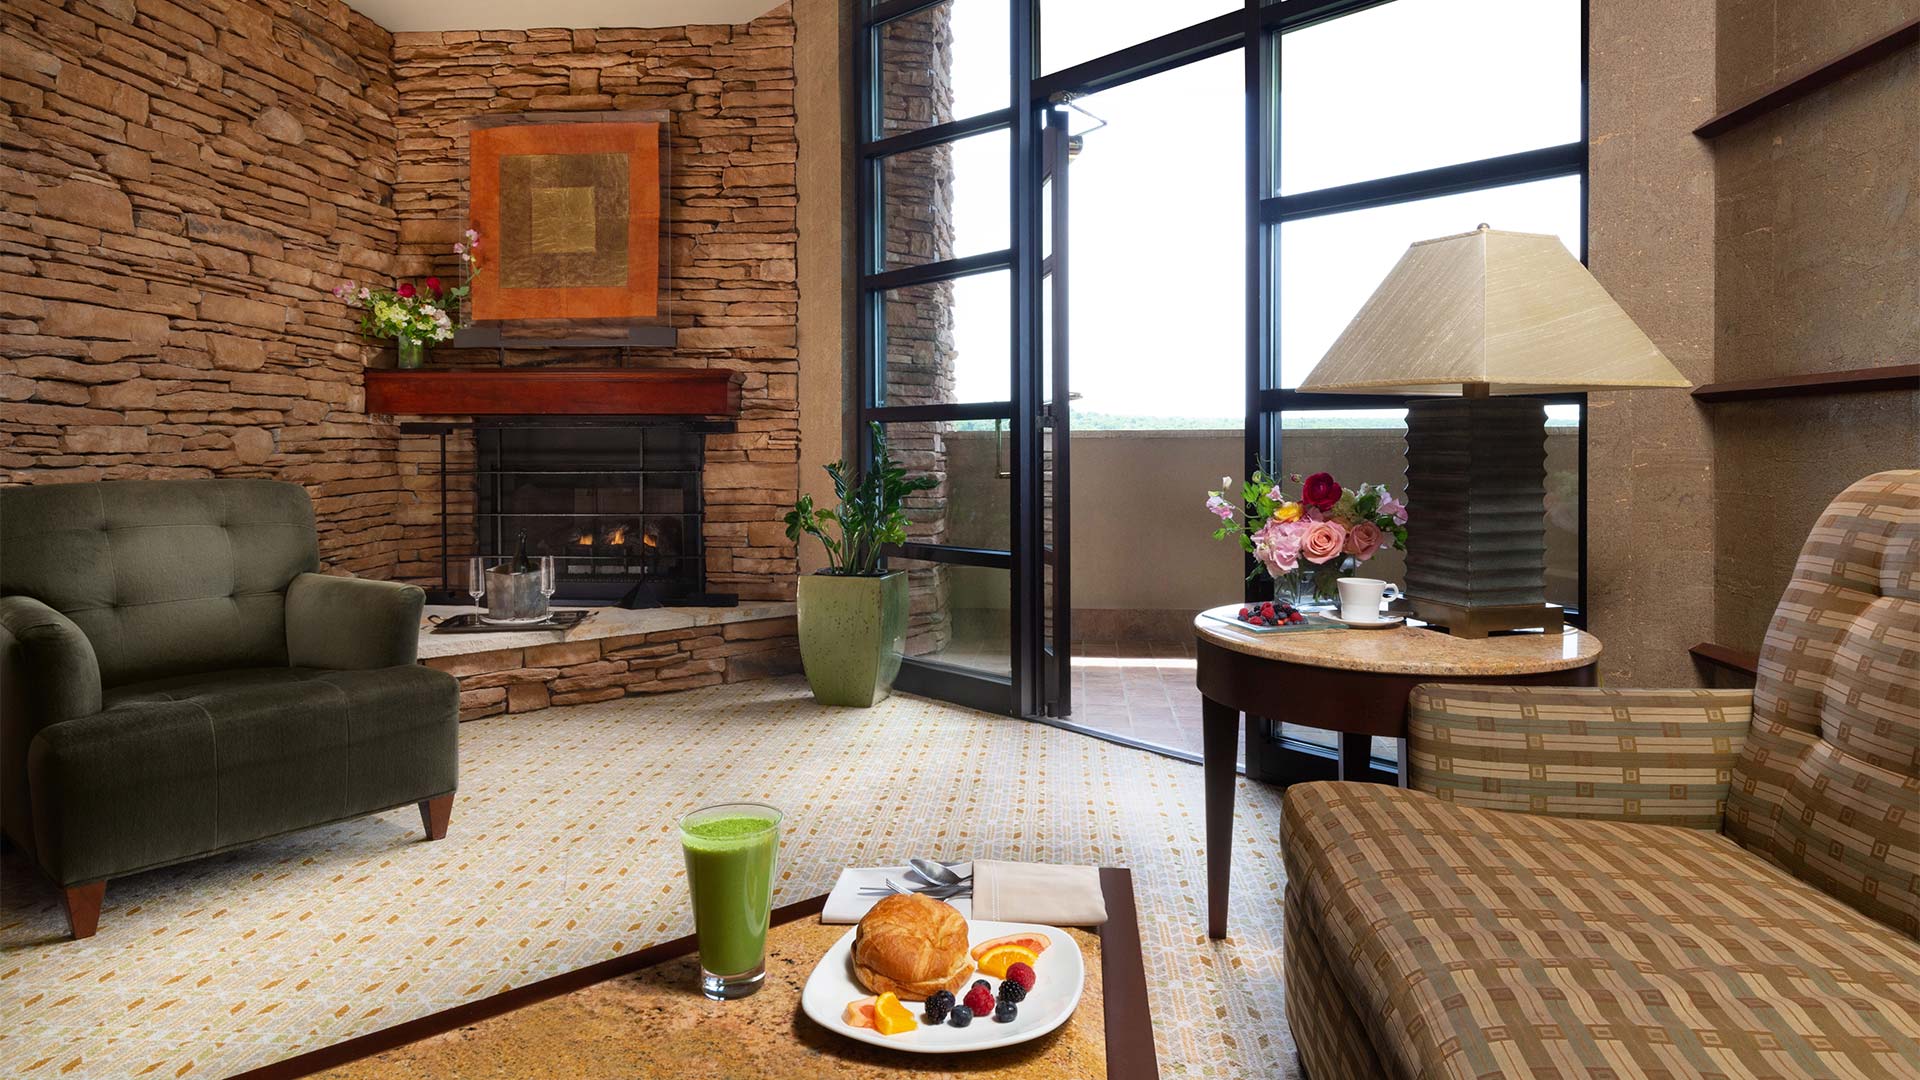 interior shot of Falling Rock's king suite living area. There is a couch and an arm chair around a coffee table with breakfast on it. There is a fireplace in the background and a door leading out onto a balcony